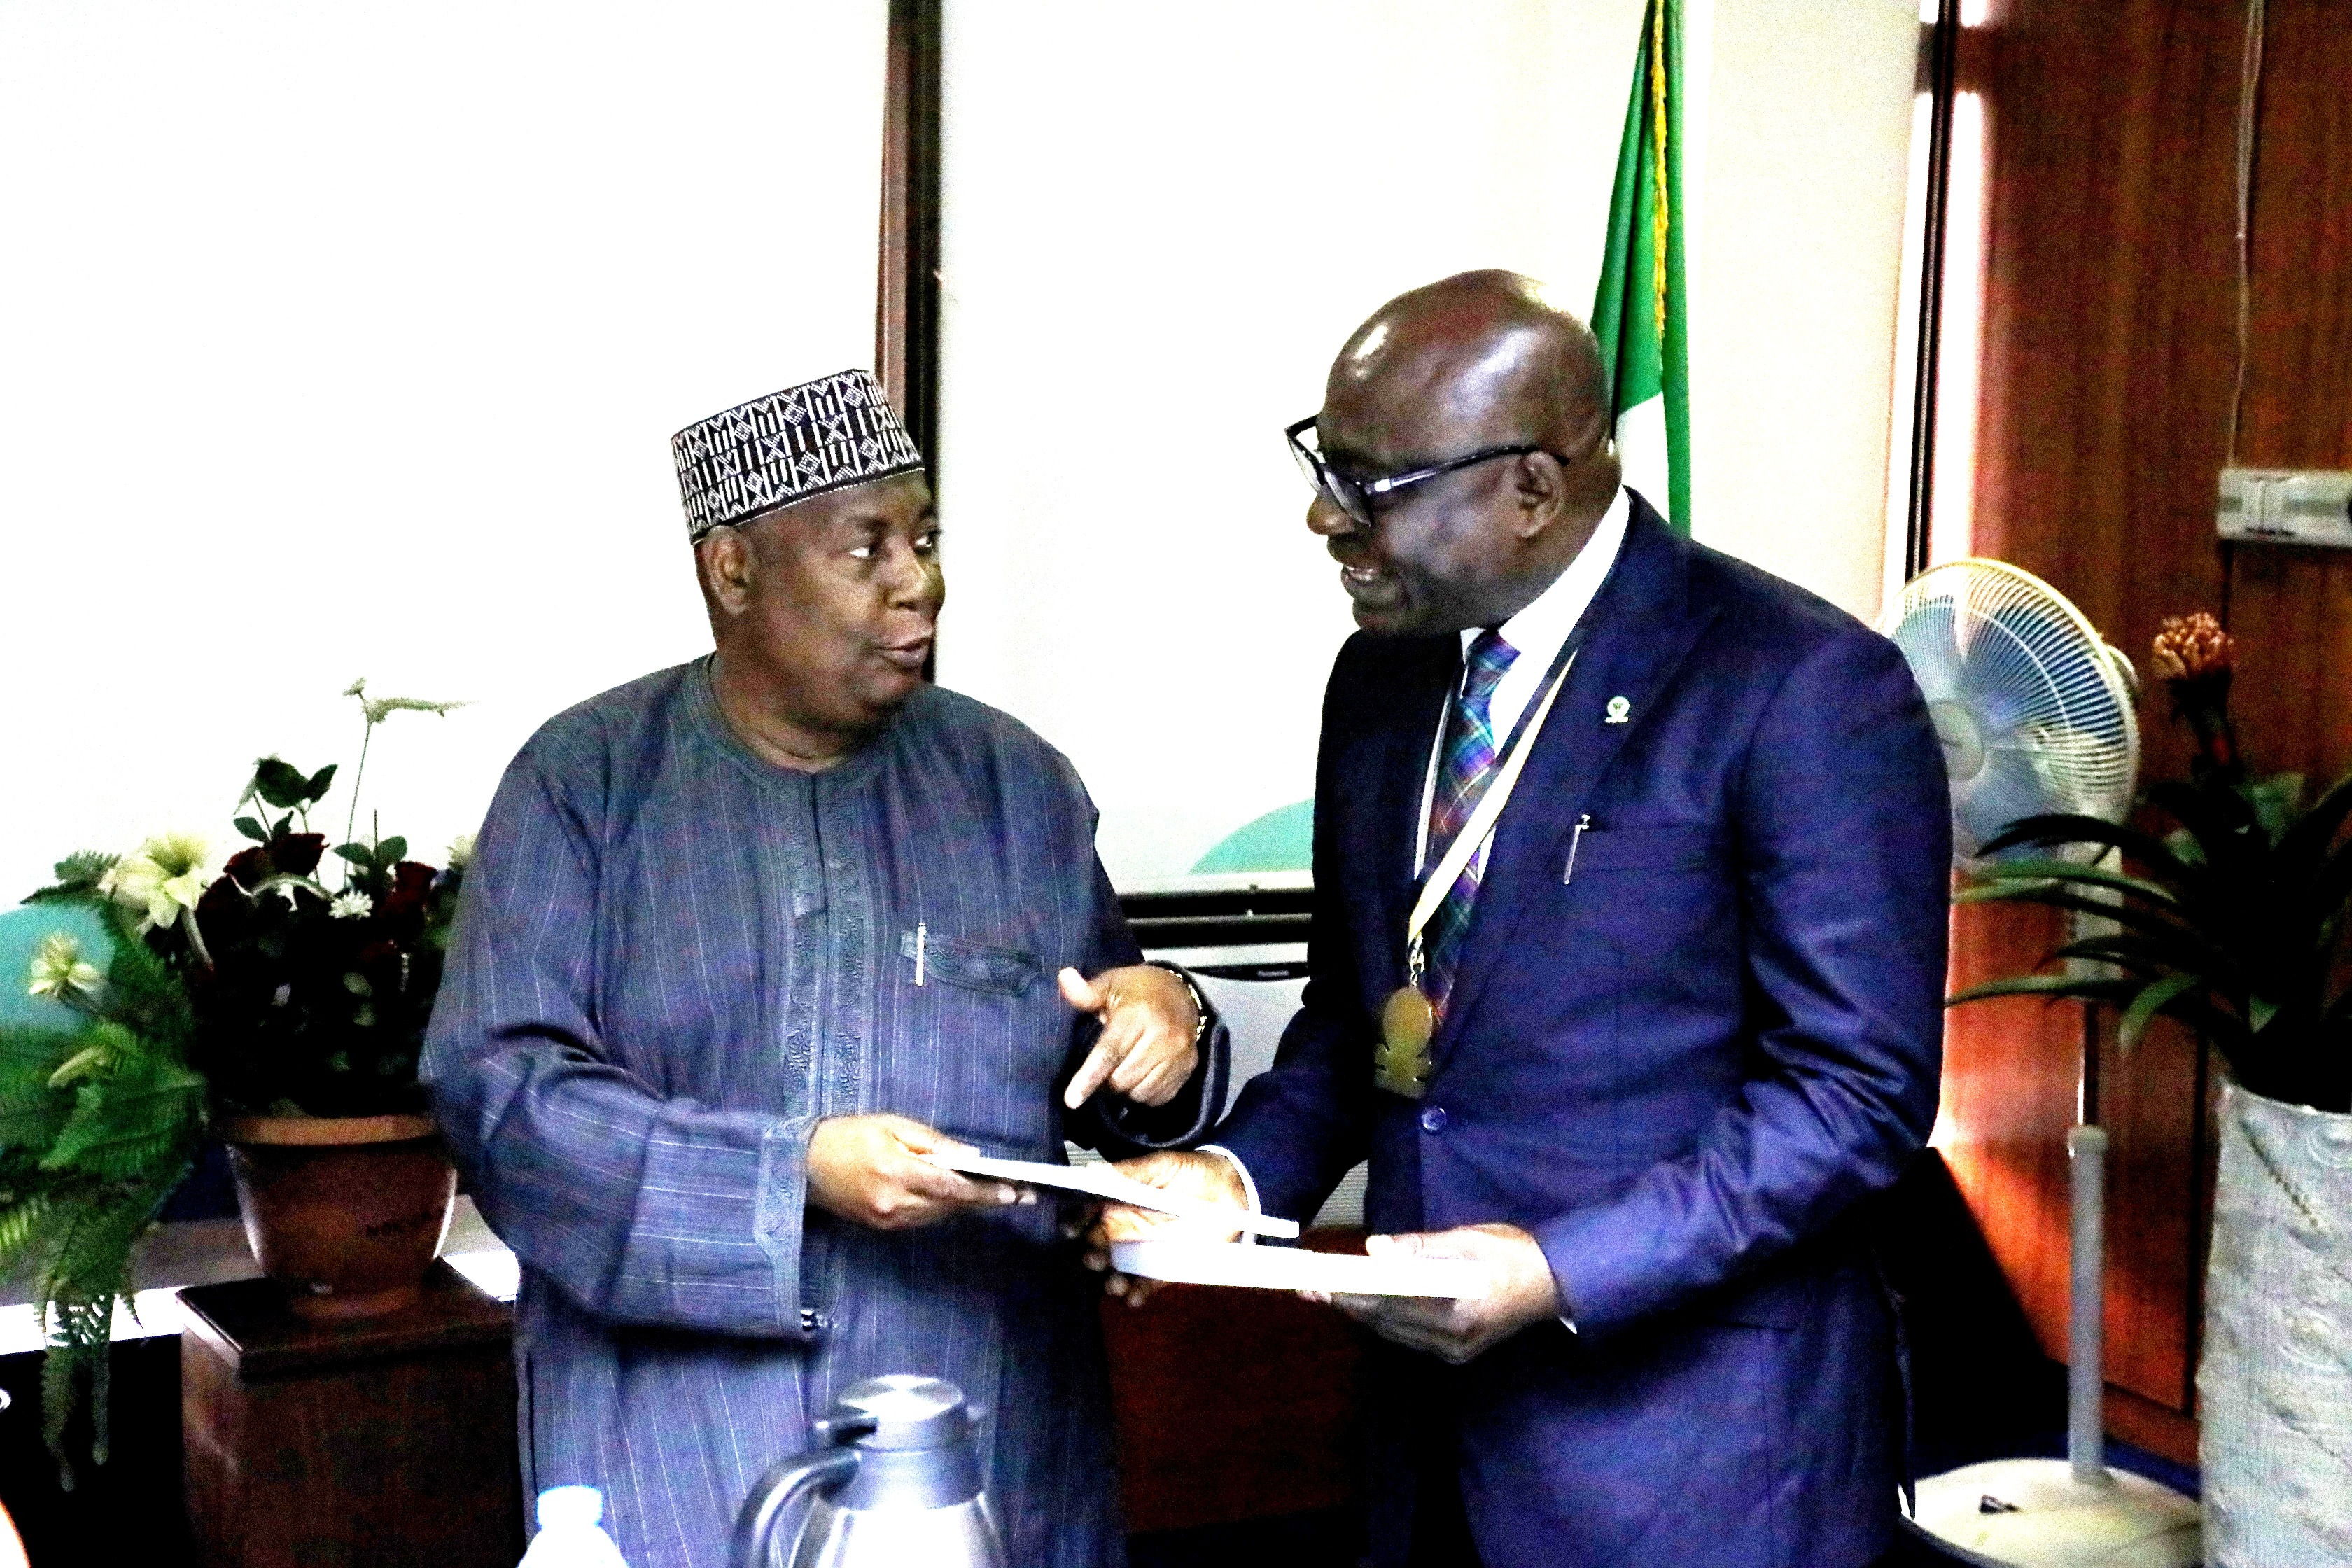 L-R: Nigeria Deposit Insurance Corporation (NDIC) MD/CE, Umaru Ibrahim, presents the Corporation’s research publications to the President and Chairman of Council, Chartered Institute of Bankers of Nigeria (CIBN), Dr. Uche Olowu during the Council’s courtesy visit to the NDIC Management at the Corporation’s Head Office, Abuja.